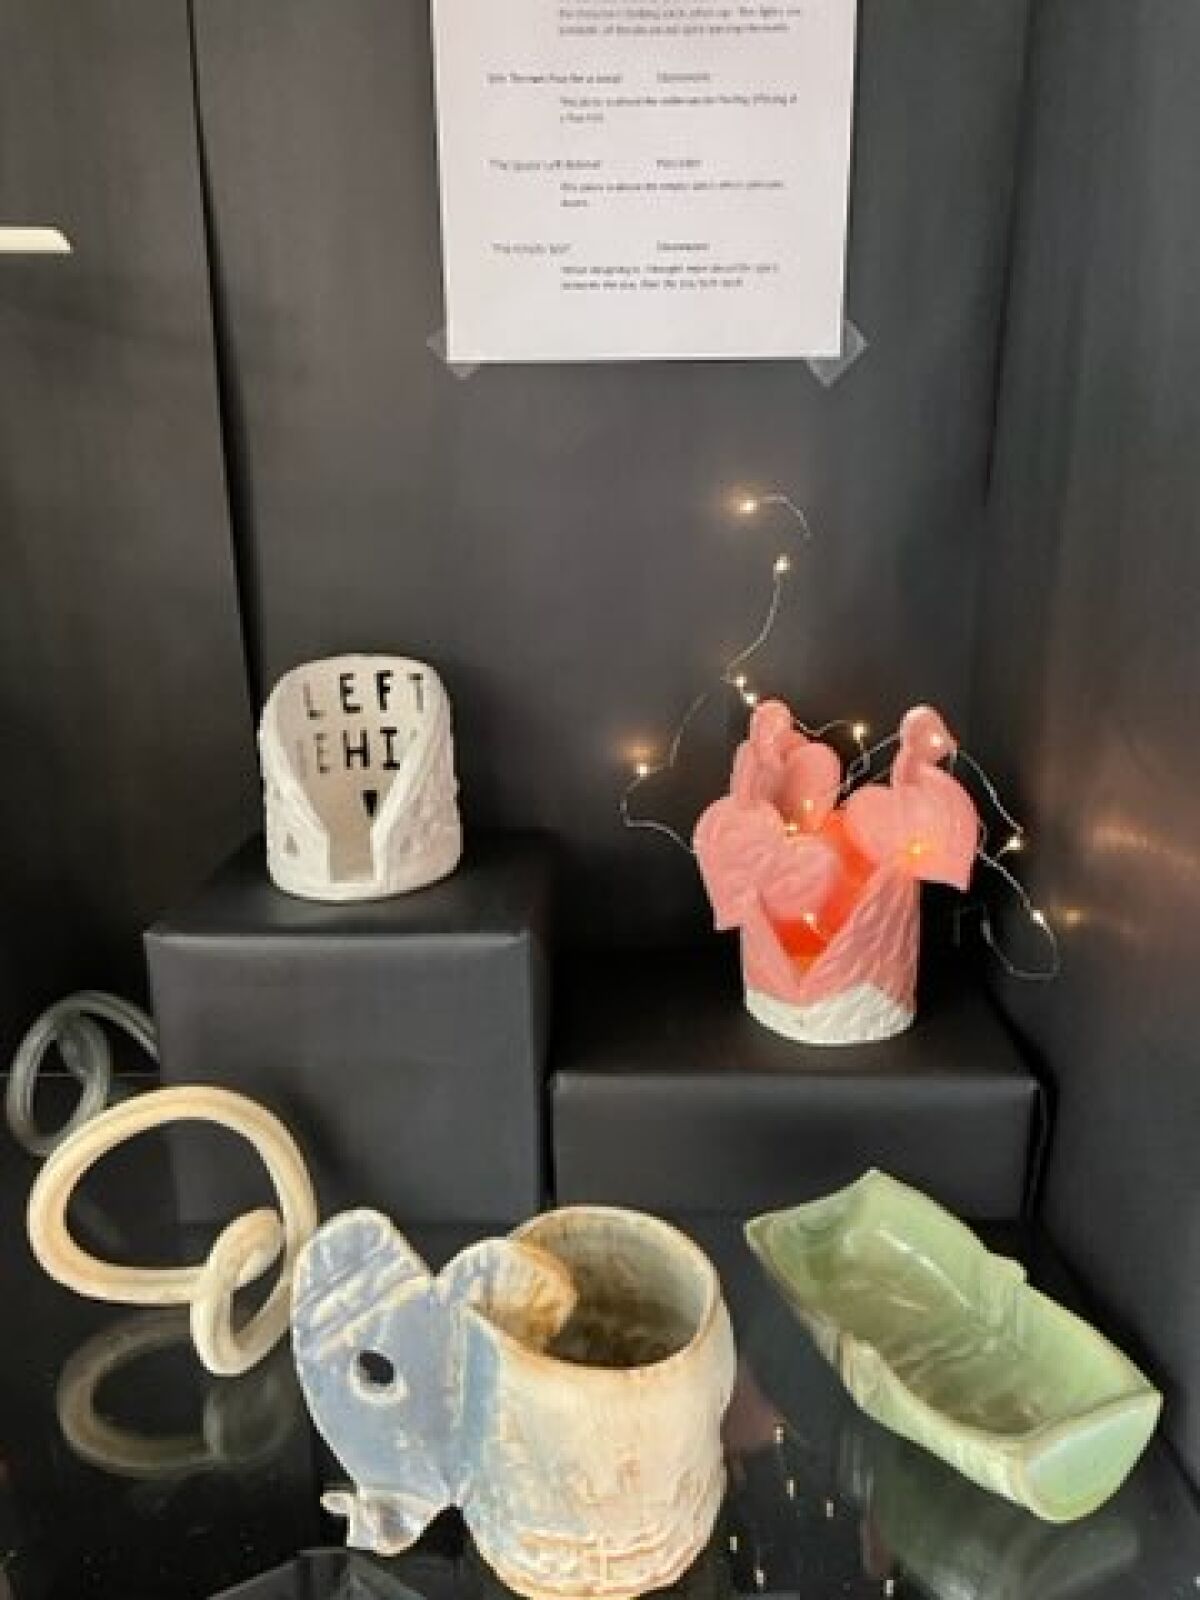 Works of ceramic art by Amelia Eastman are on view at the La Jolla/Riford Library.